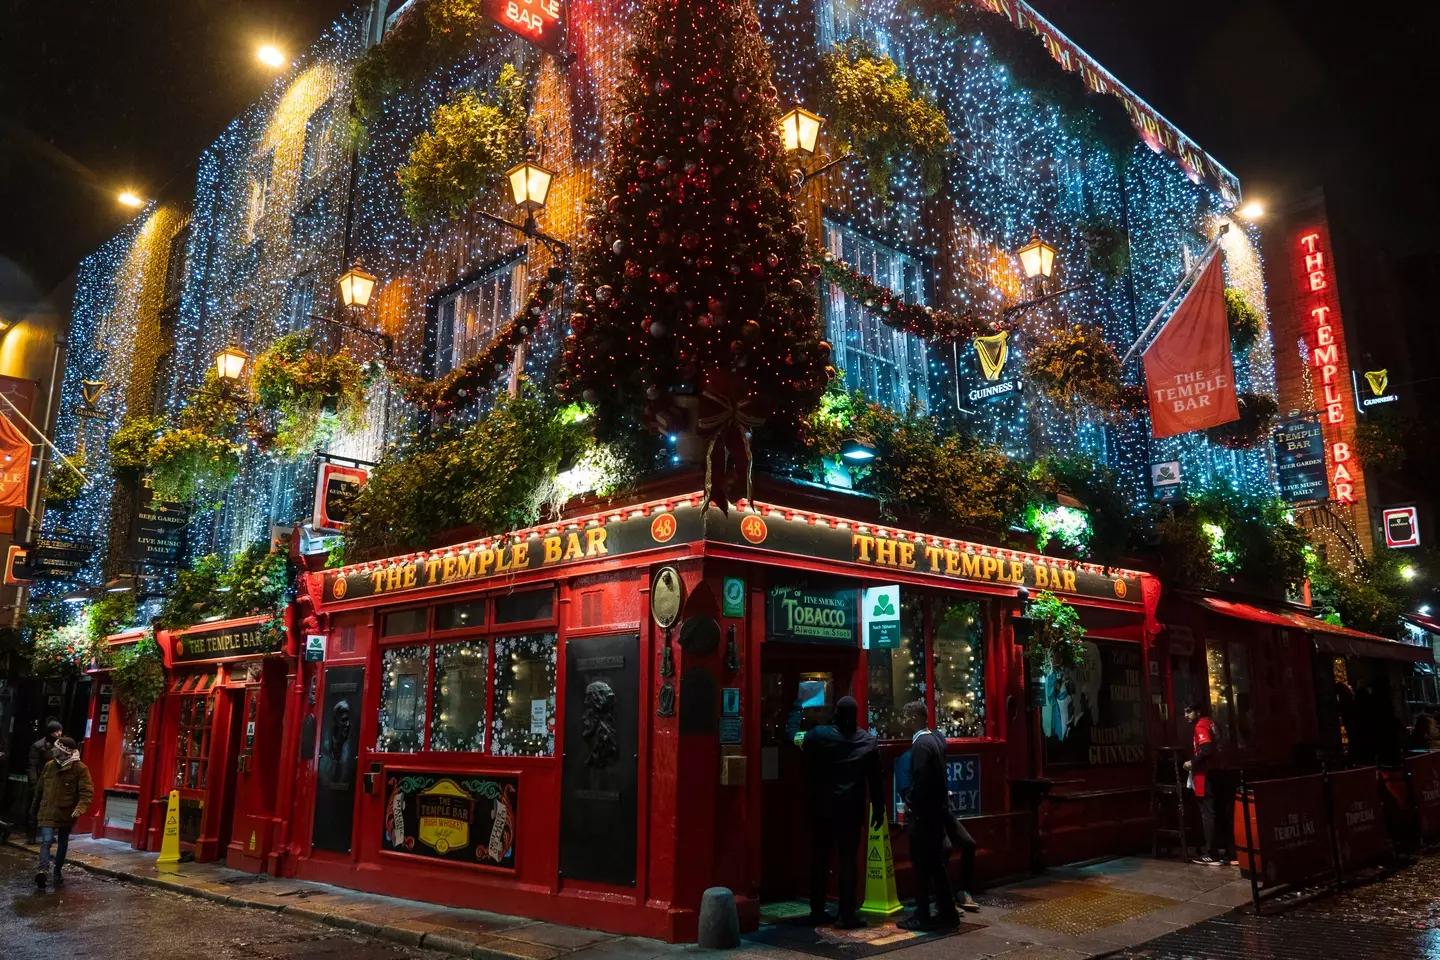 There's nothing like a pub pint on Christmas Eve.